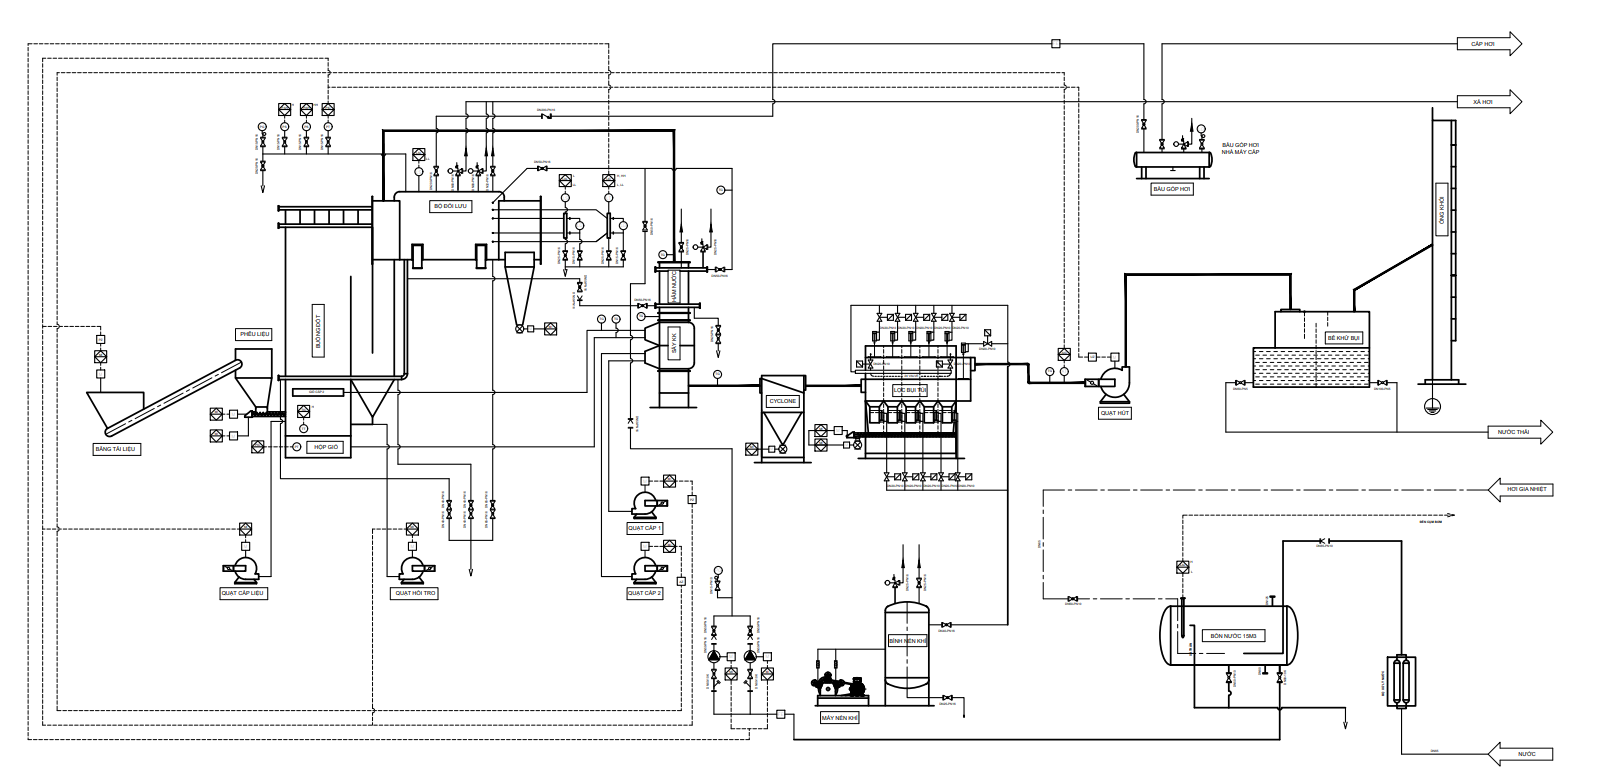 Control P&ID for Steam Boiler